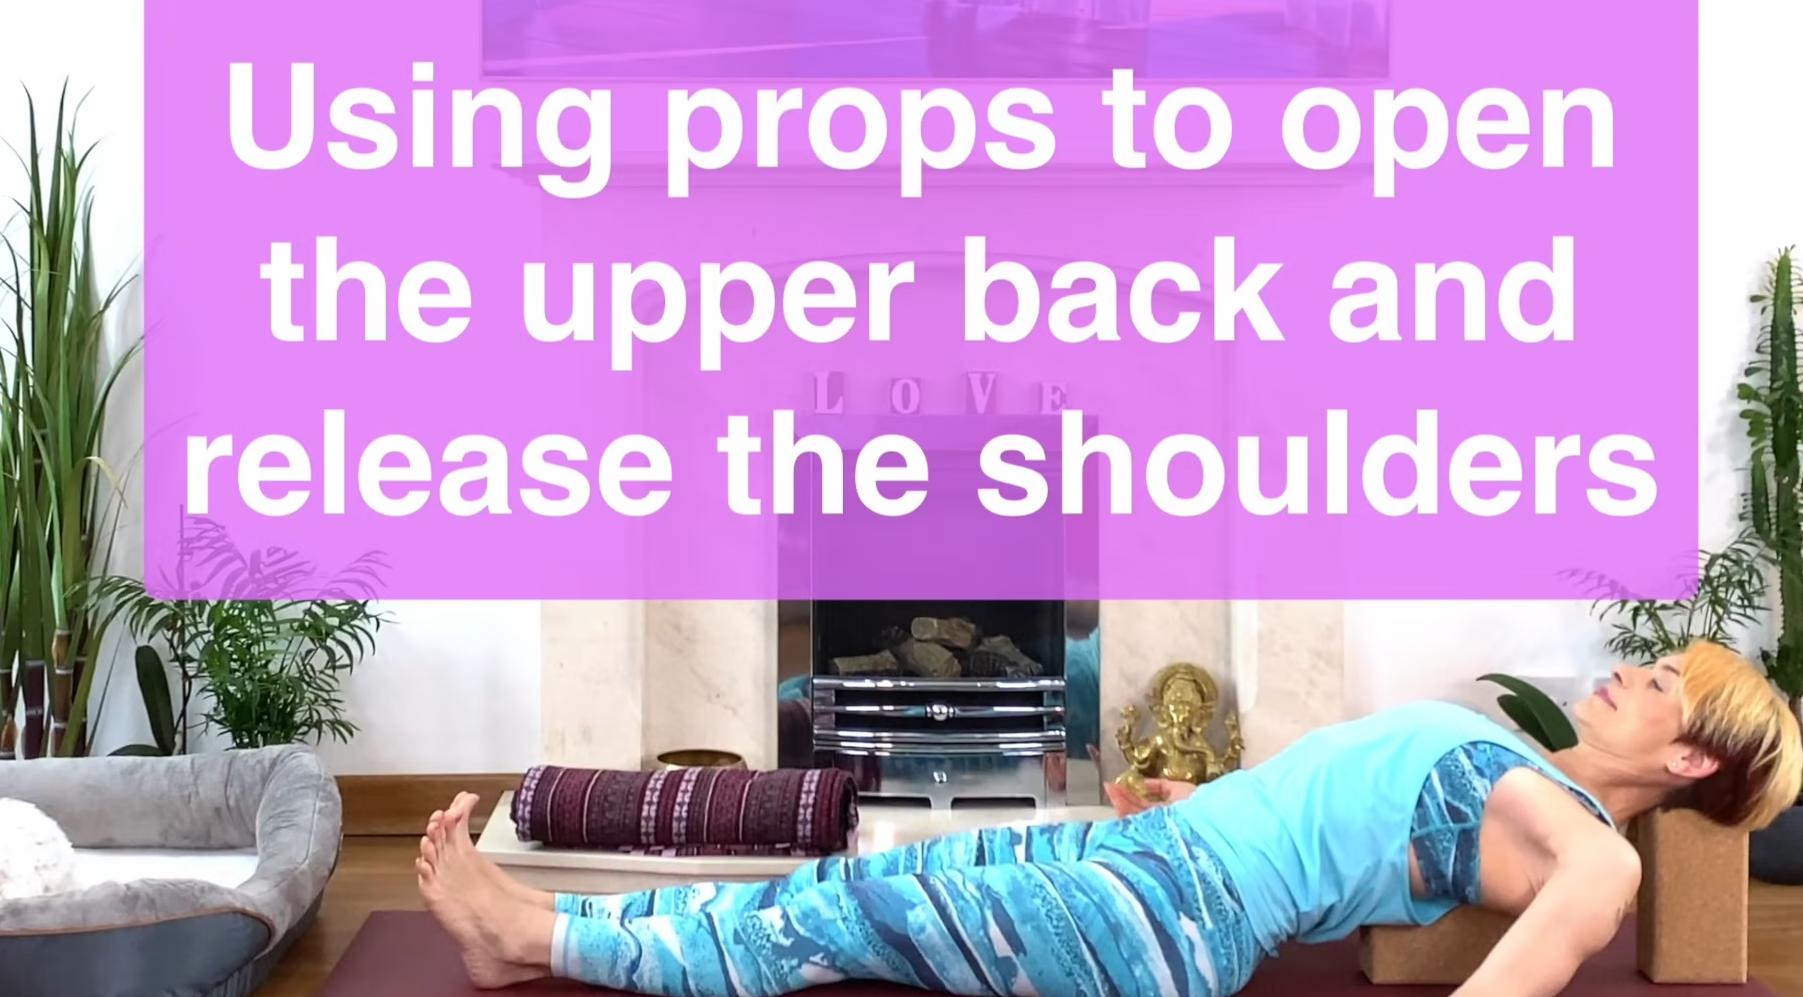 Olga Oakenfold - Using props to open the upper back and release the shoulders - Full yoga class